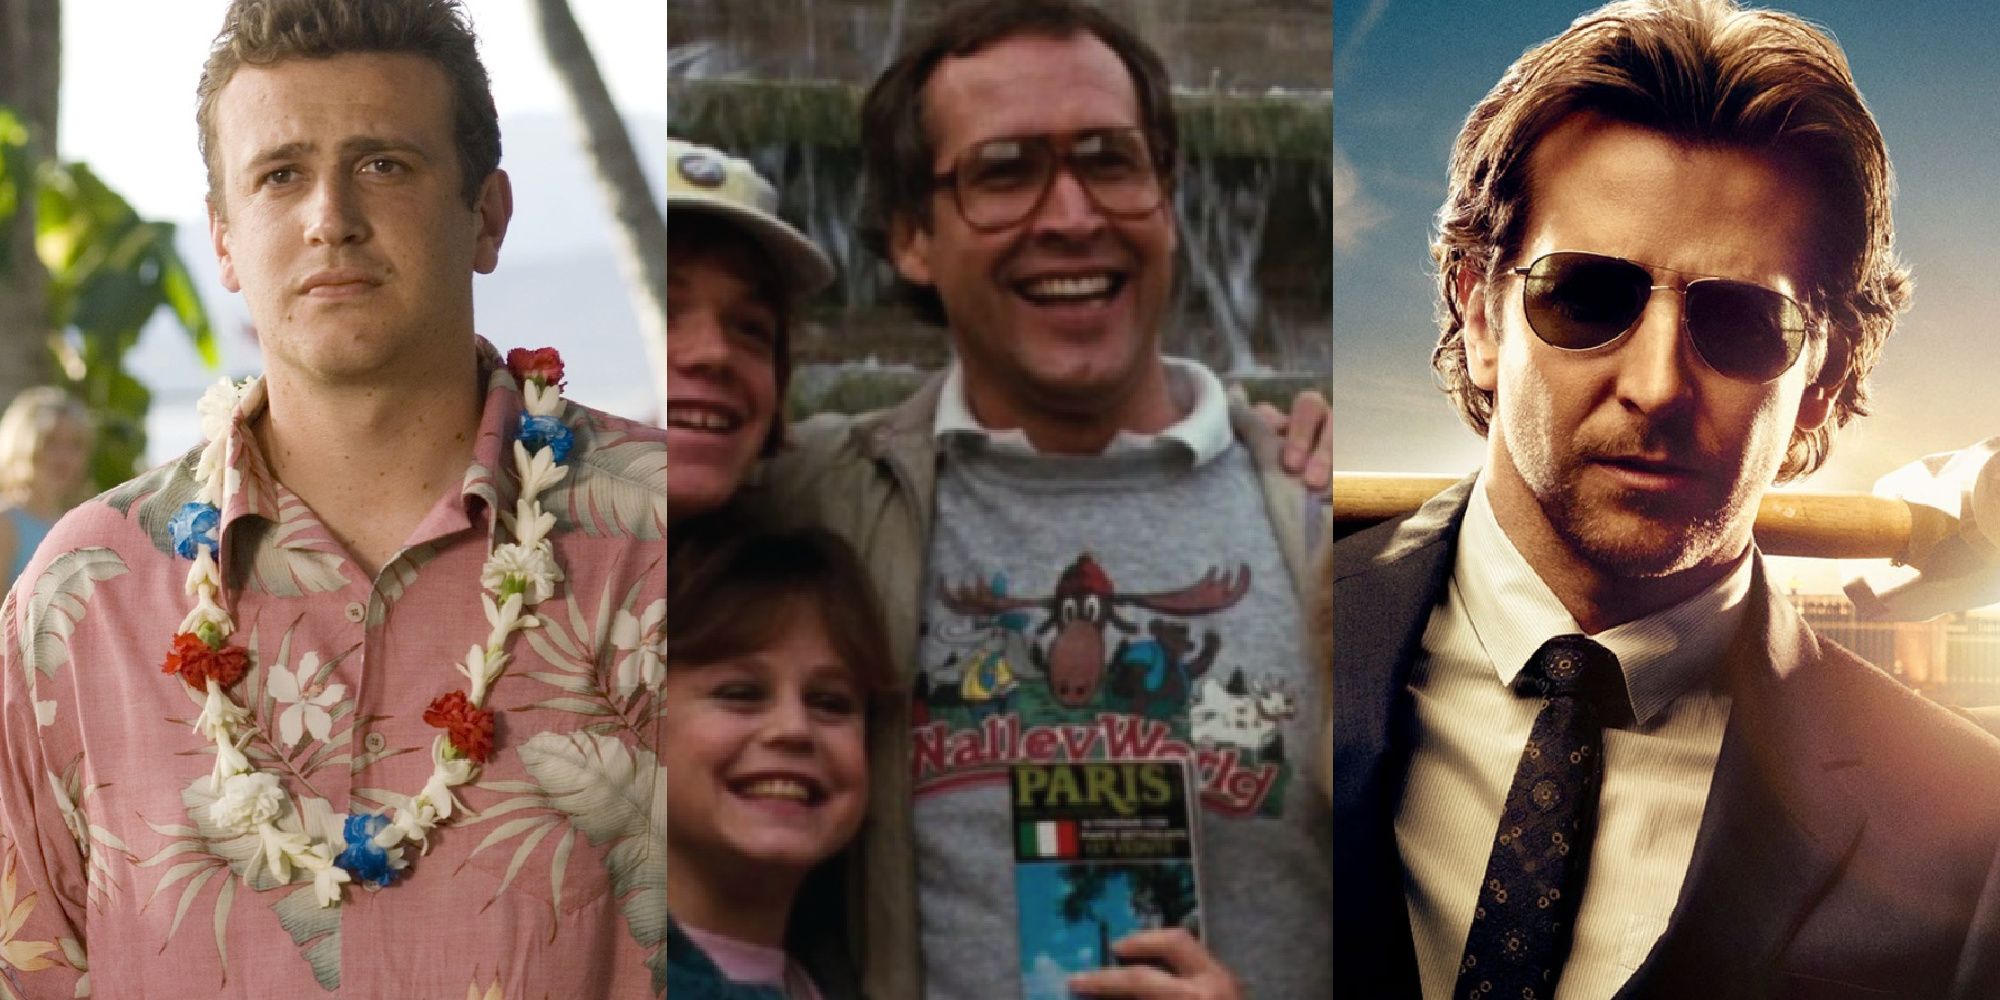 A split image of Forgetting Sarah Marshall, National Lampoon, and The Hangover.